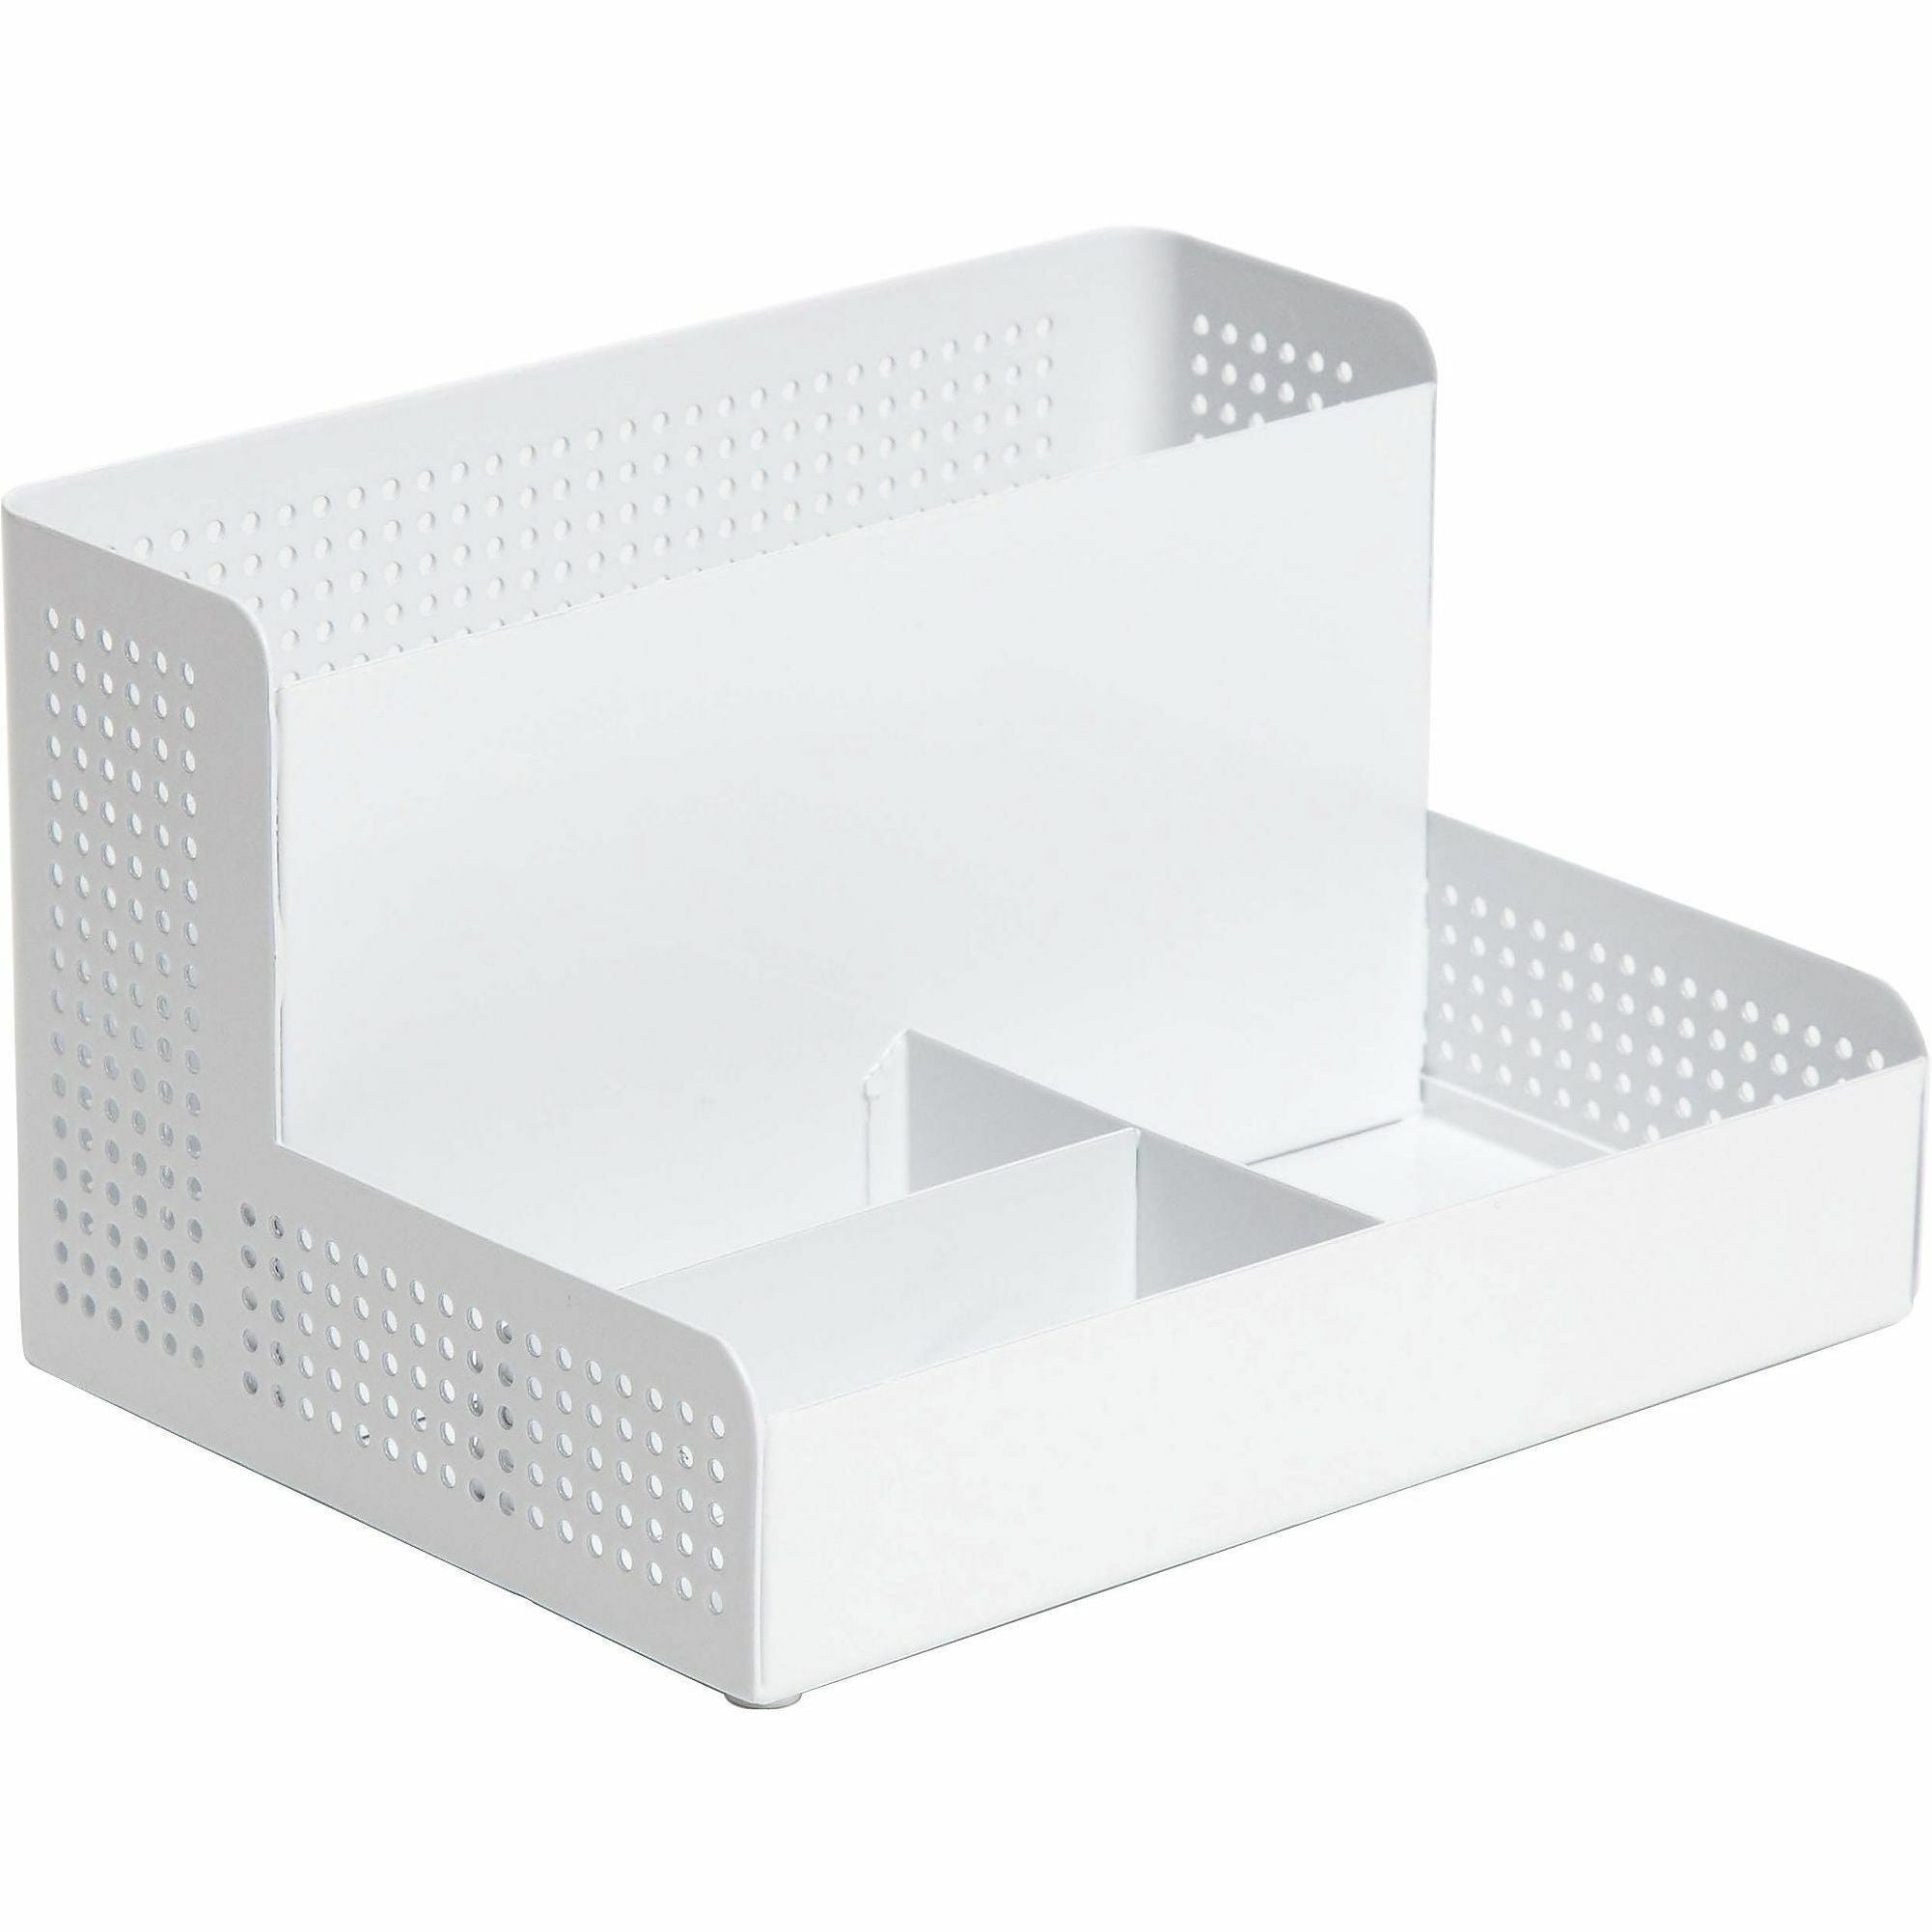 u-brands-perforated-all-in-one-desktop-organizer-4-compartments-compact-metal-1-each_ubr5717u0106 - 3